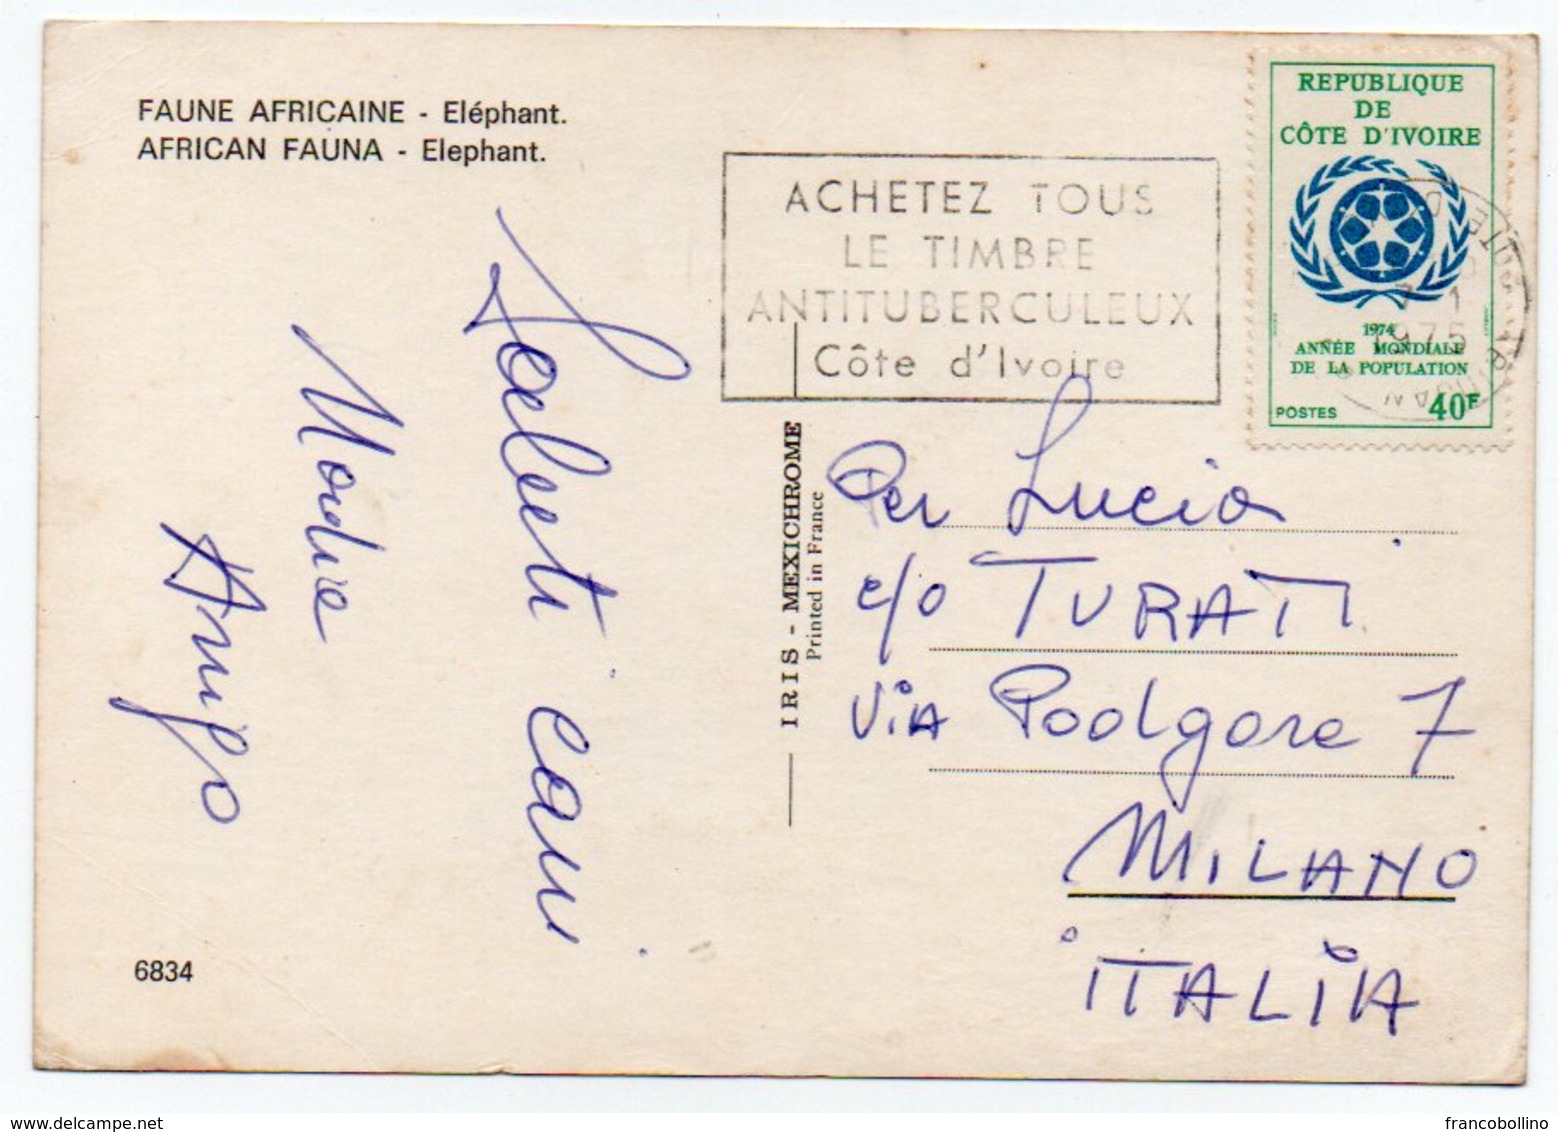 FAUNE AFRICAINE - ELEPHANT / THEMATIC STAMP - Costa D'Avorio